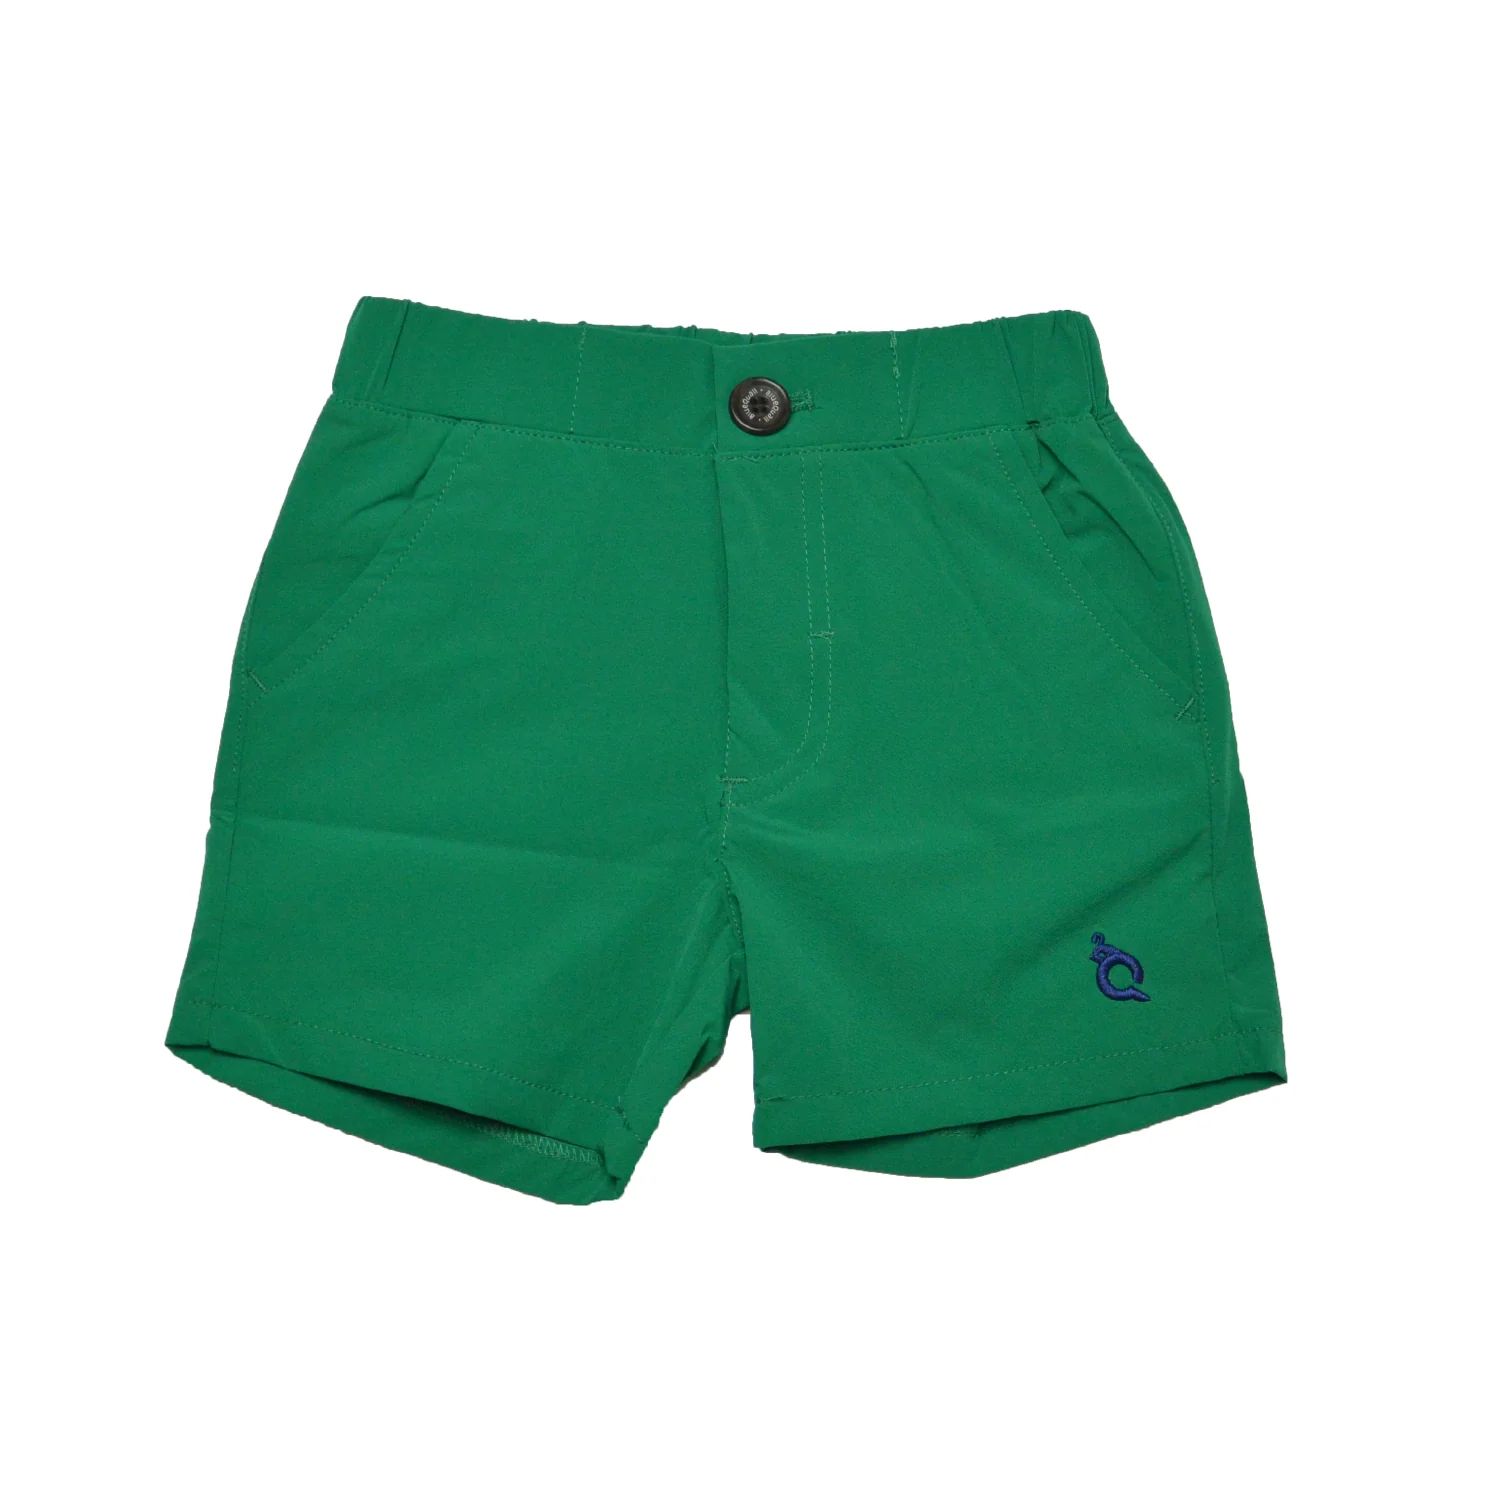 Jade Shorts - Everyday Collection | Blue Quail Clothing Co. | BlueQuail Clothing Co.